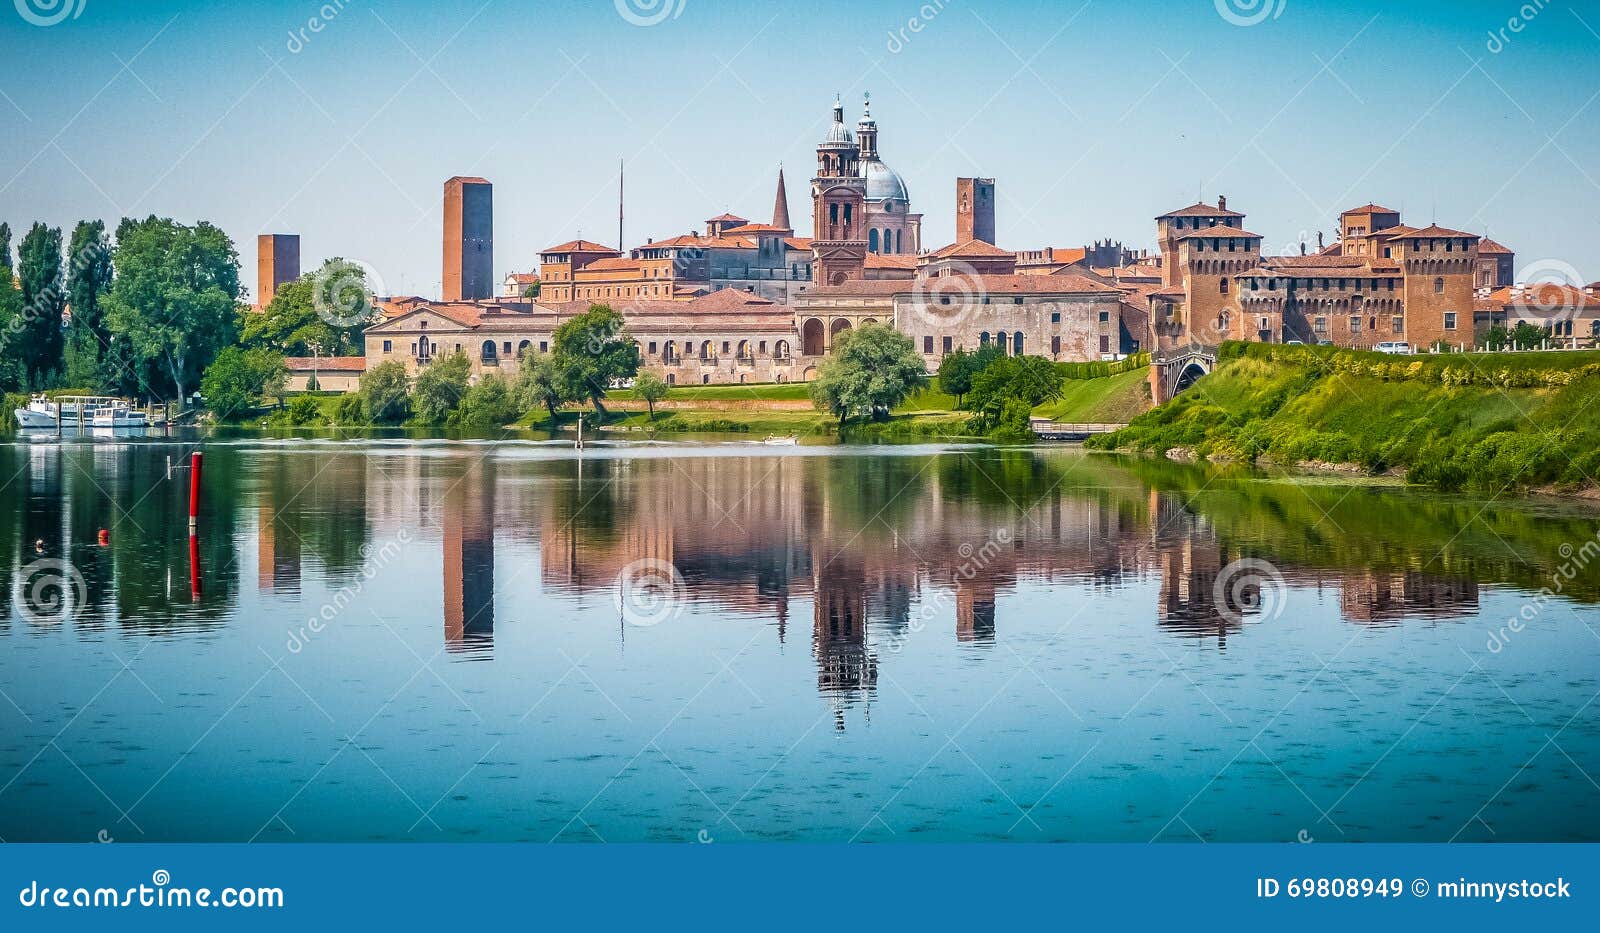 medieval city of mantua in lombardy, italy